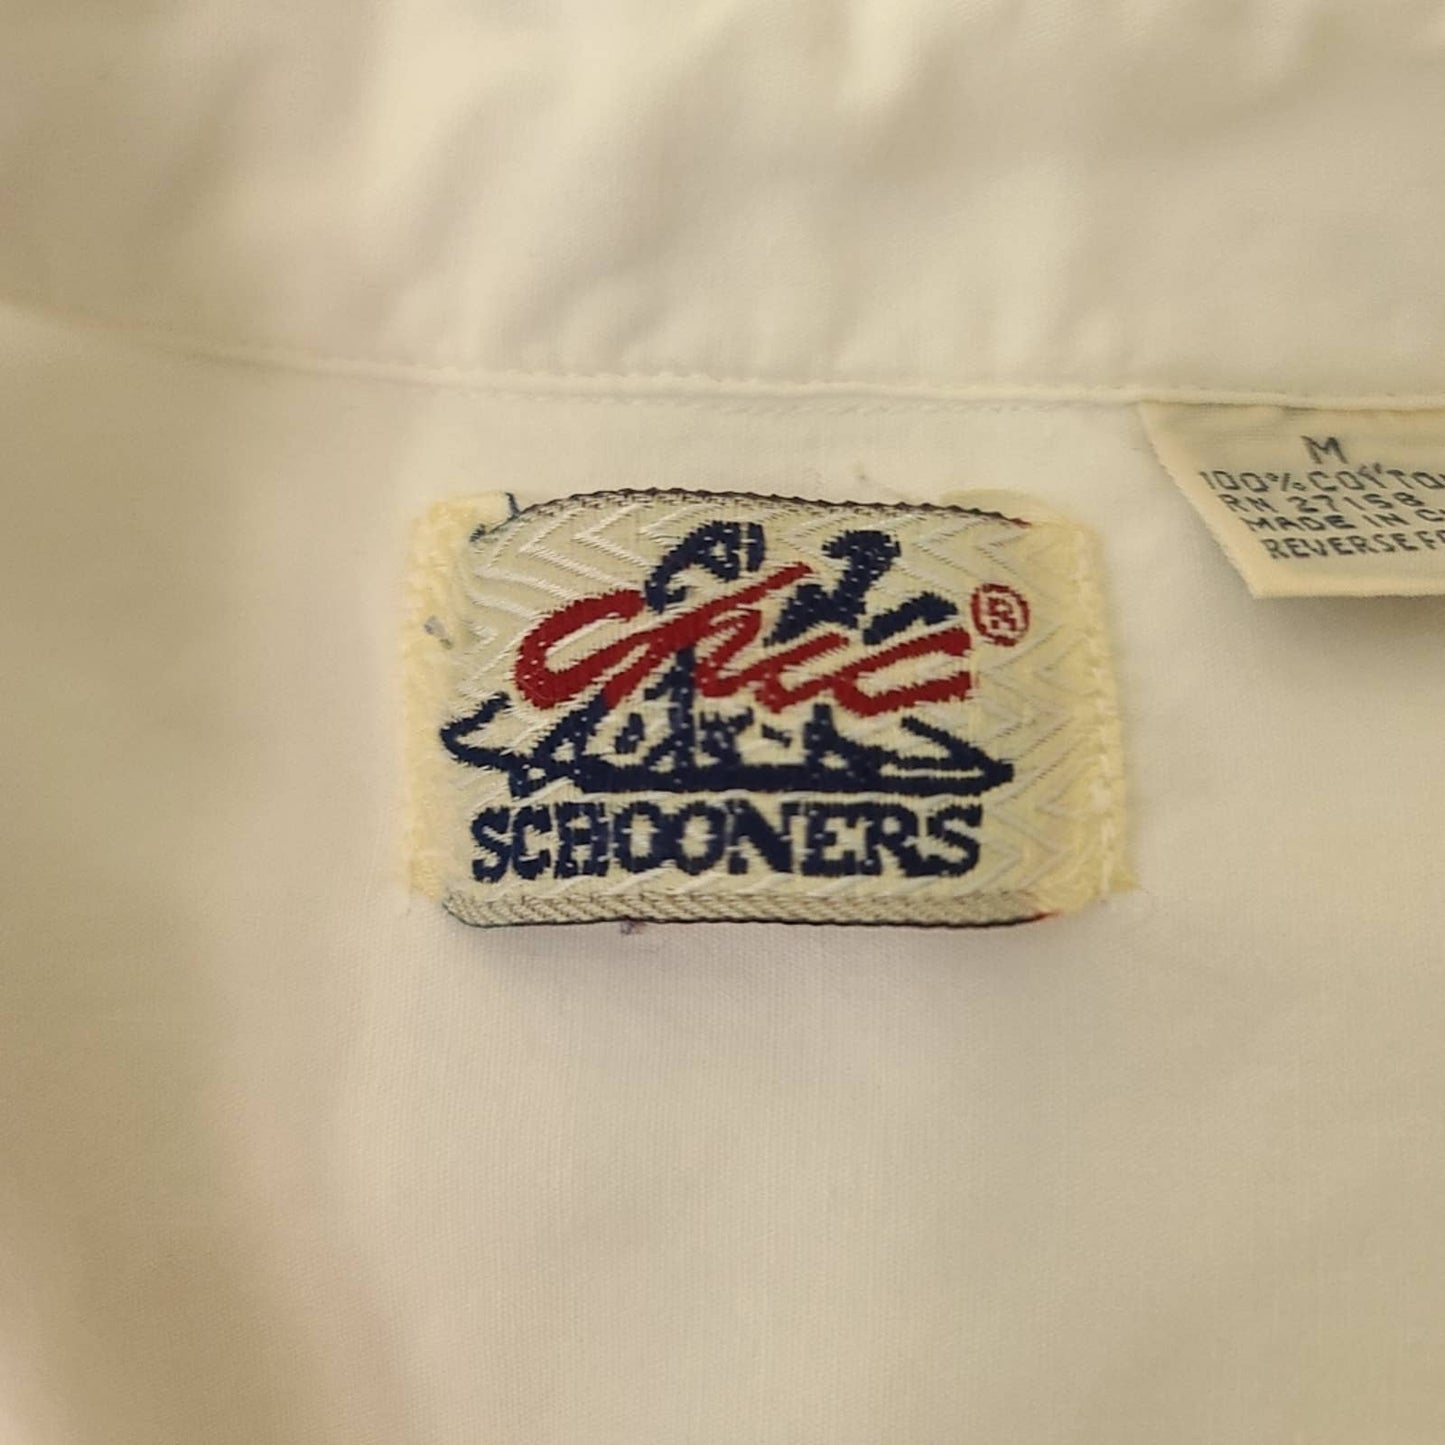 Vintage Chic Schooners Embroidered Long Sleeve White Cotton Button Up Shirt Med